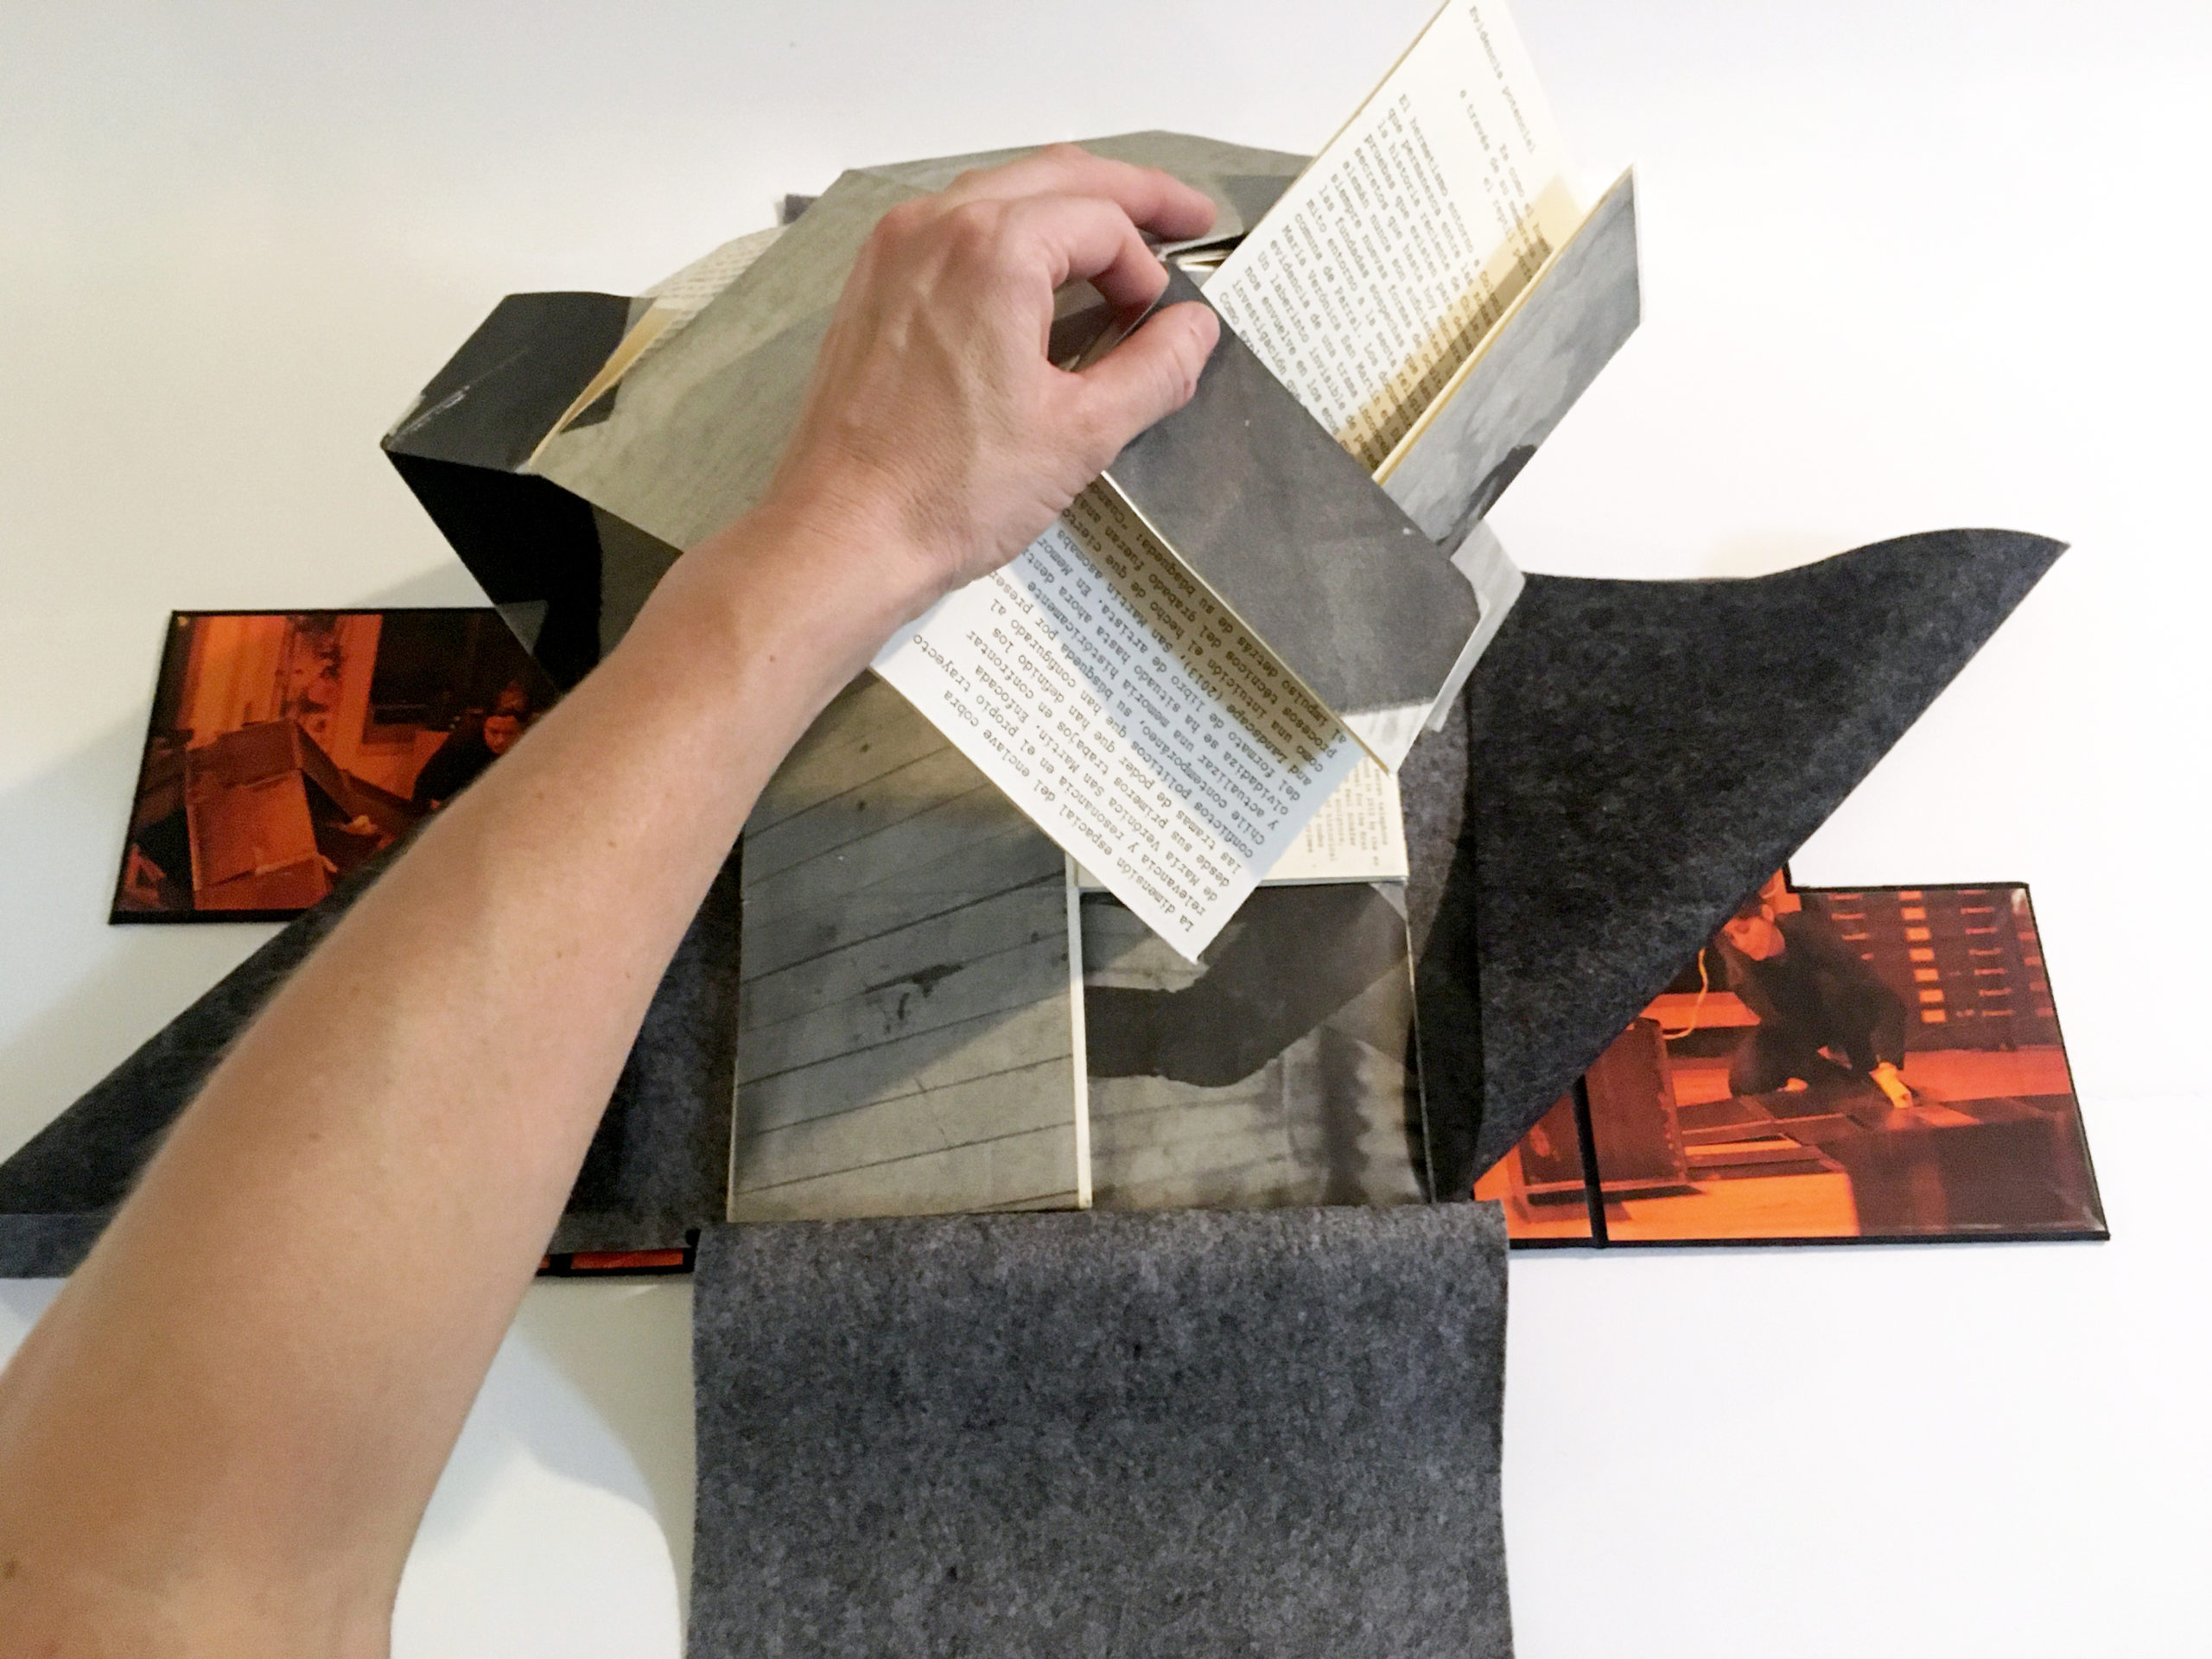 What Is an Artist's Book? Why Do Artists Make Artist's Books?